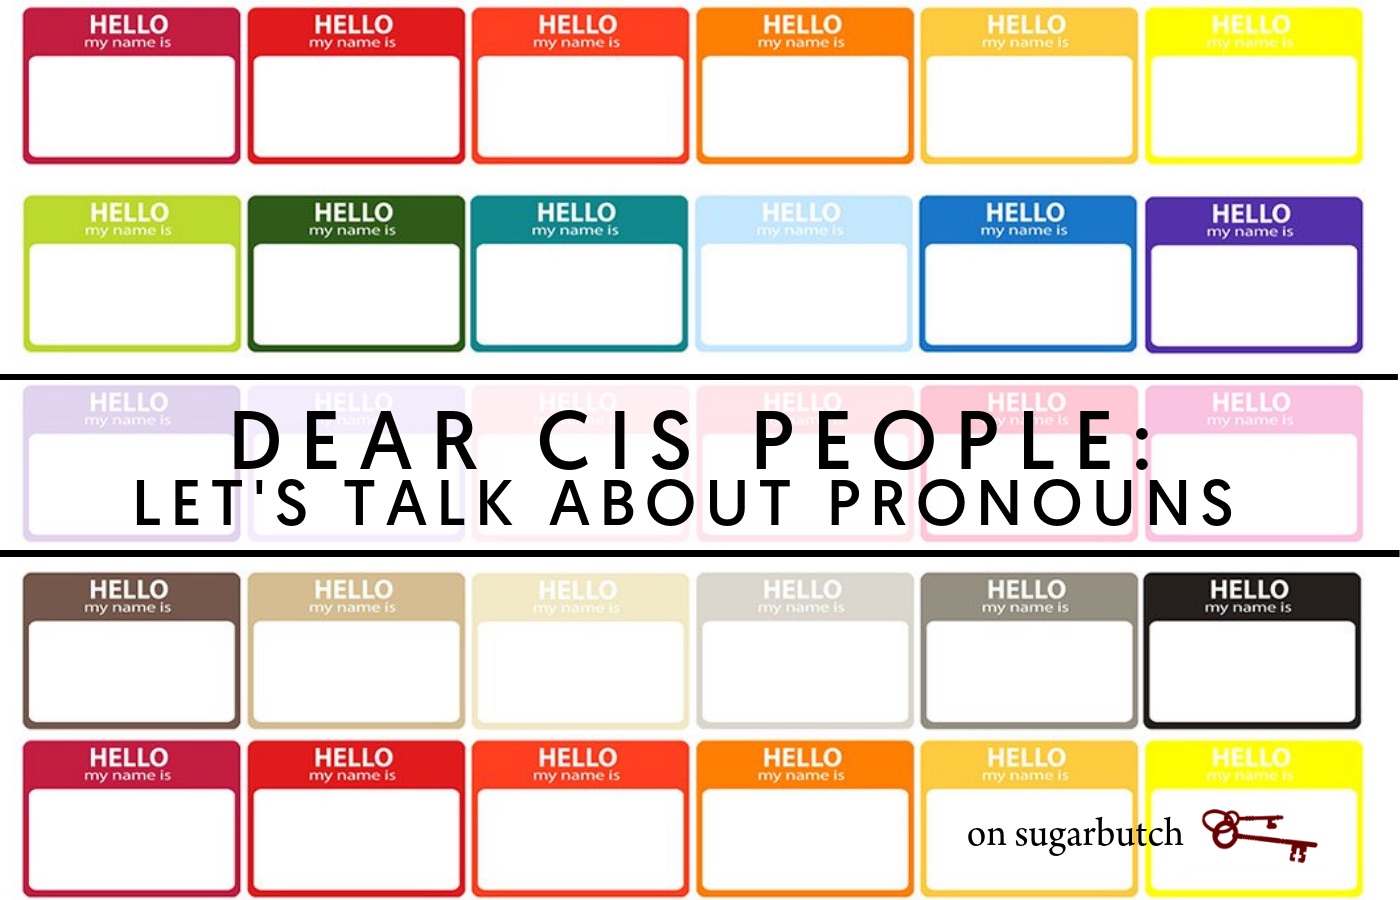 Dear (Cis) People Who Put Your Pronouns On Your “Hello My Name Is” Name Tag